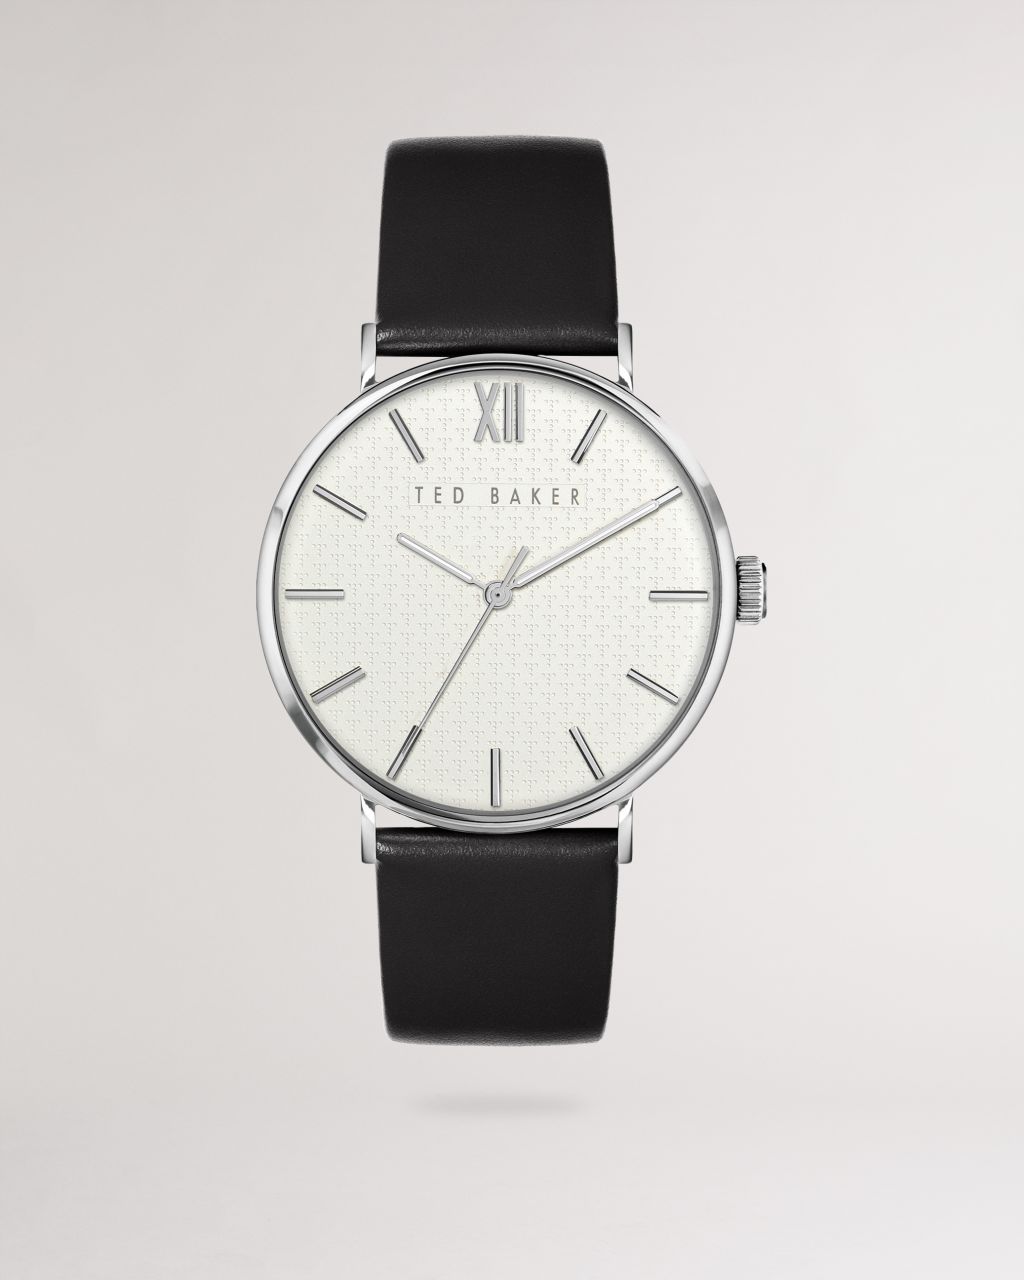 Ted Baker Leather Strap Watch in Black CALNDR, Men's Accessories